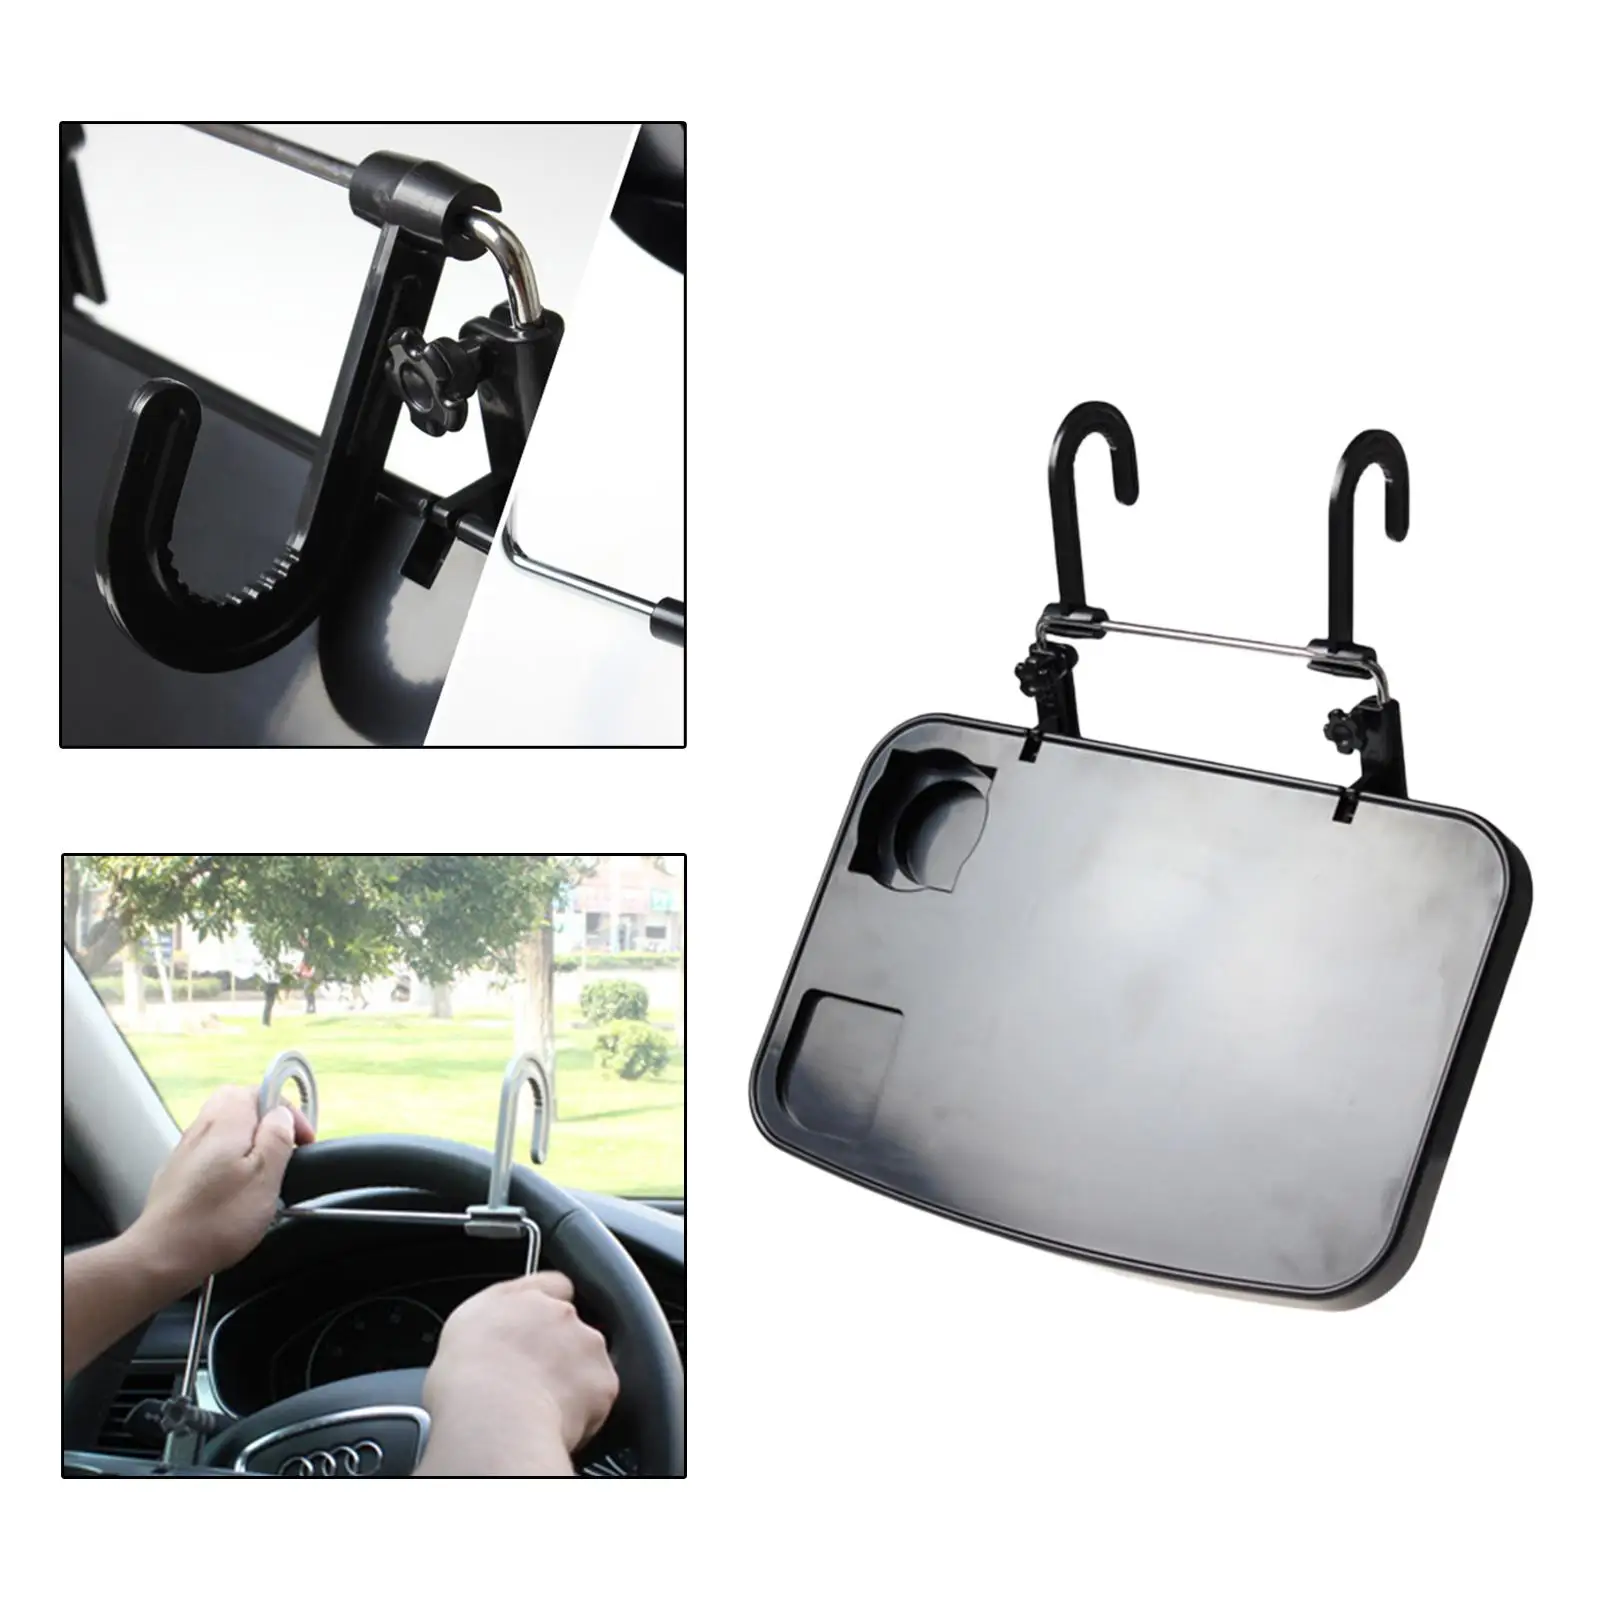 Car Computer Rack Backseat Tray Cup Holder Portable Fit for PC Notebook